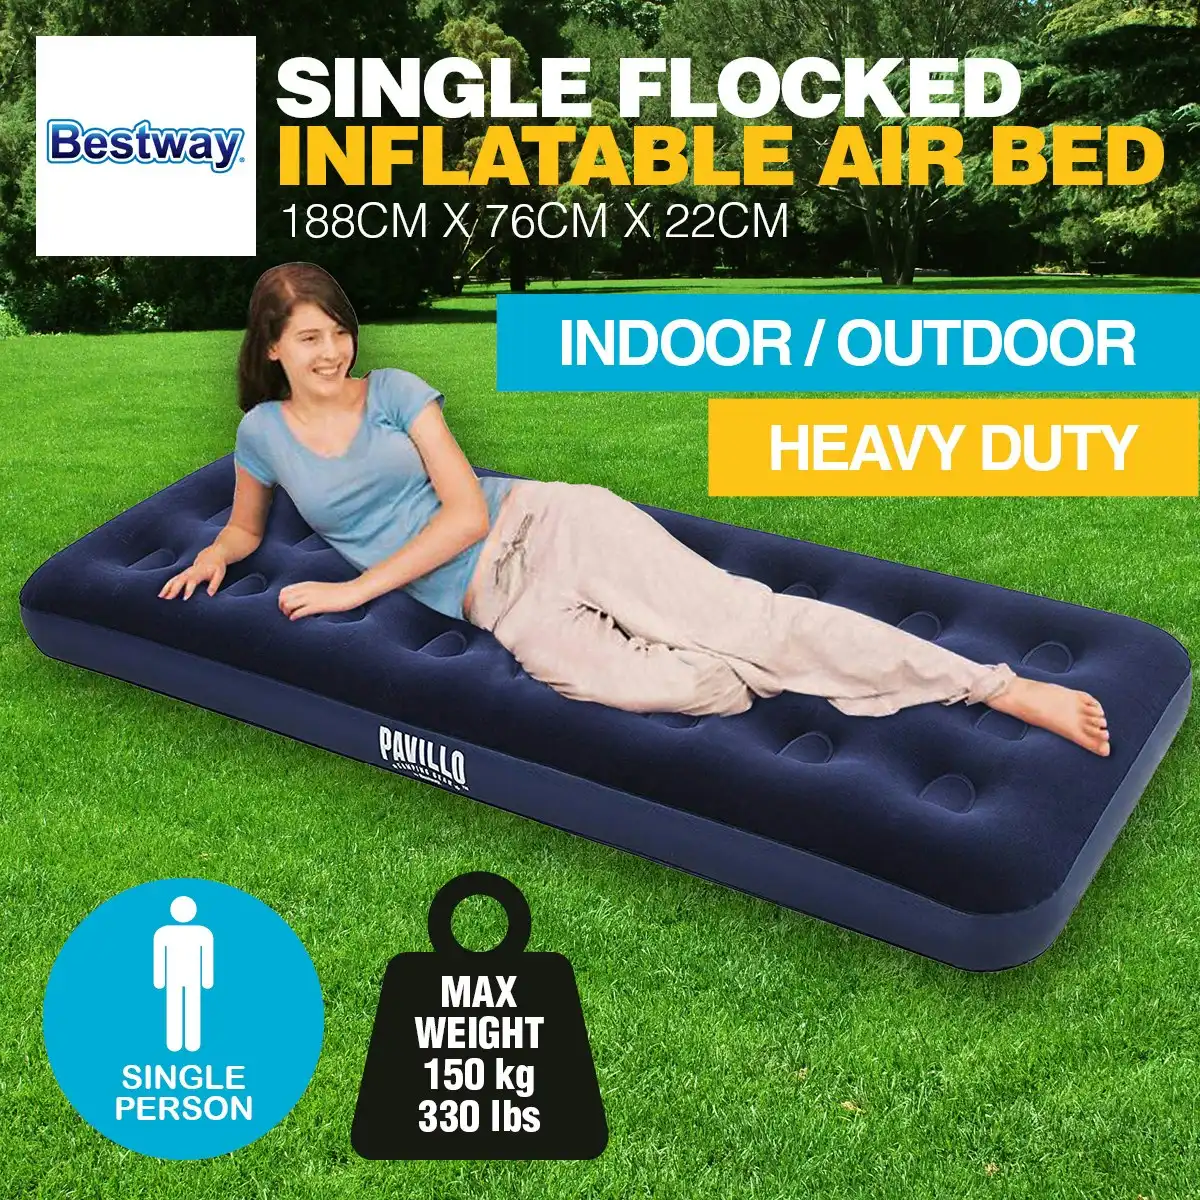 Bestway Single Inflatable Air Bed Indoor/Outdoor Heavy Duty Durable Camping